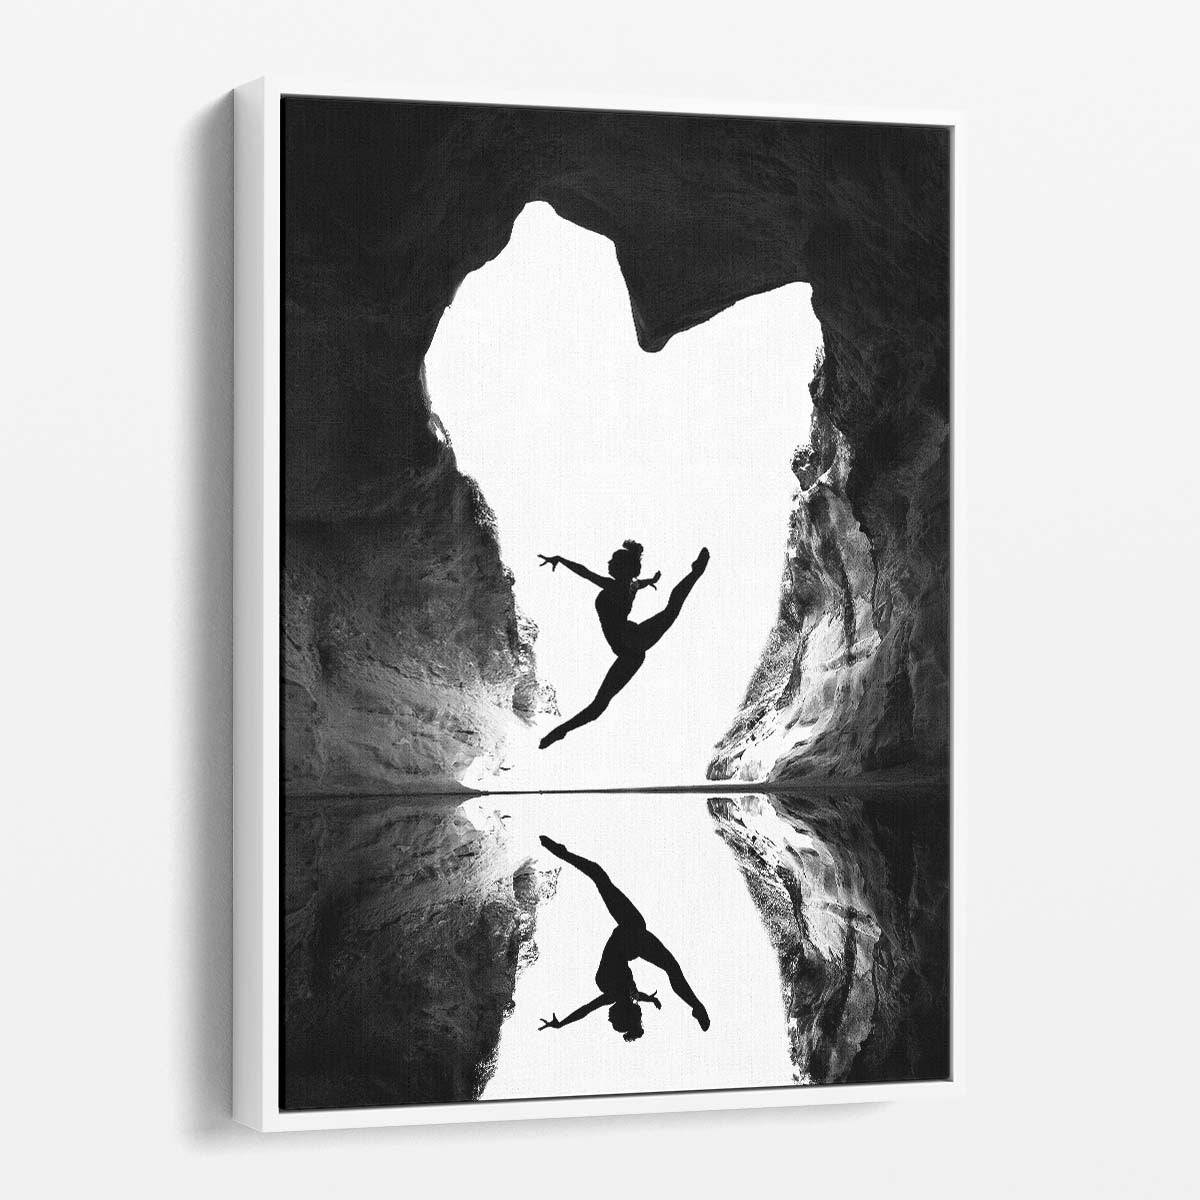 Graceful Ballerina Mid-Leap BW Silhouette Art Photography by Luxuriance Designs, made in USA